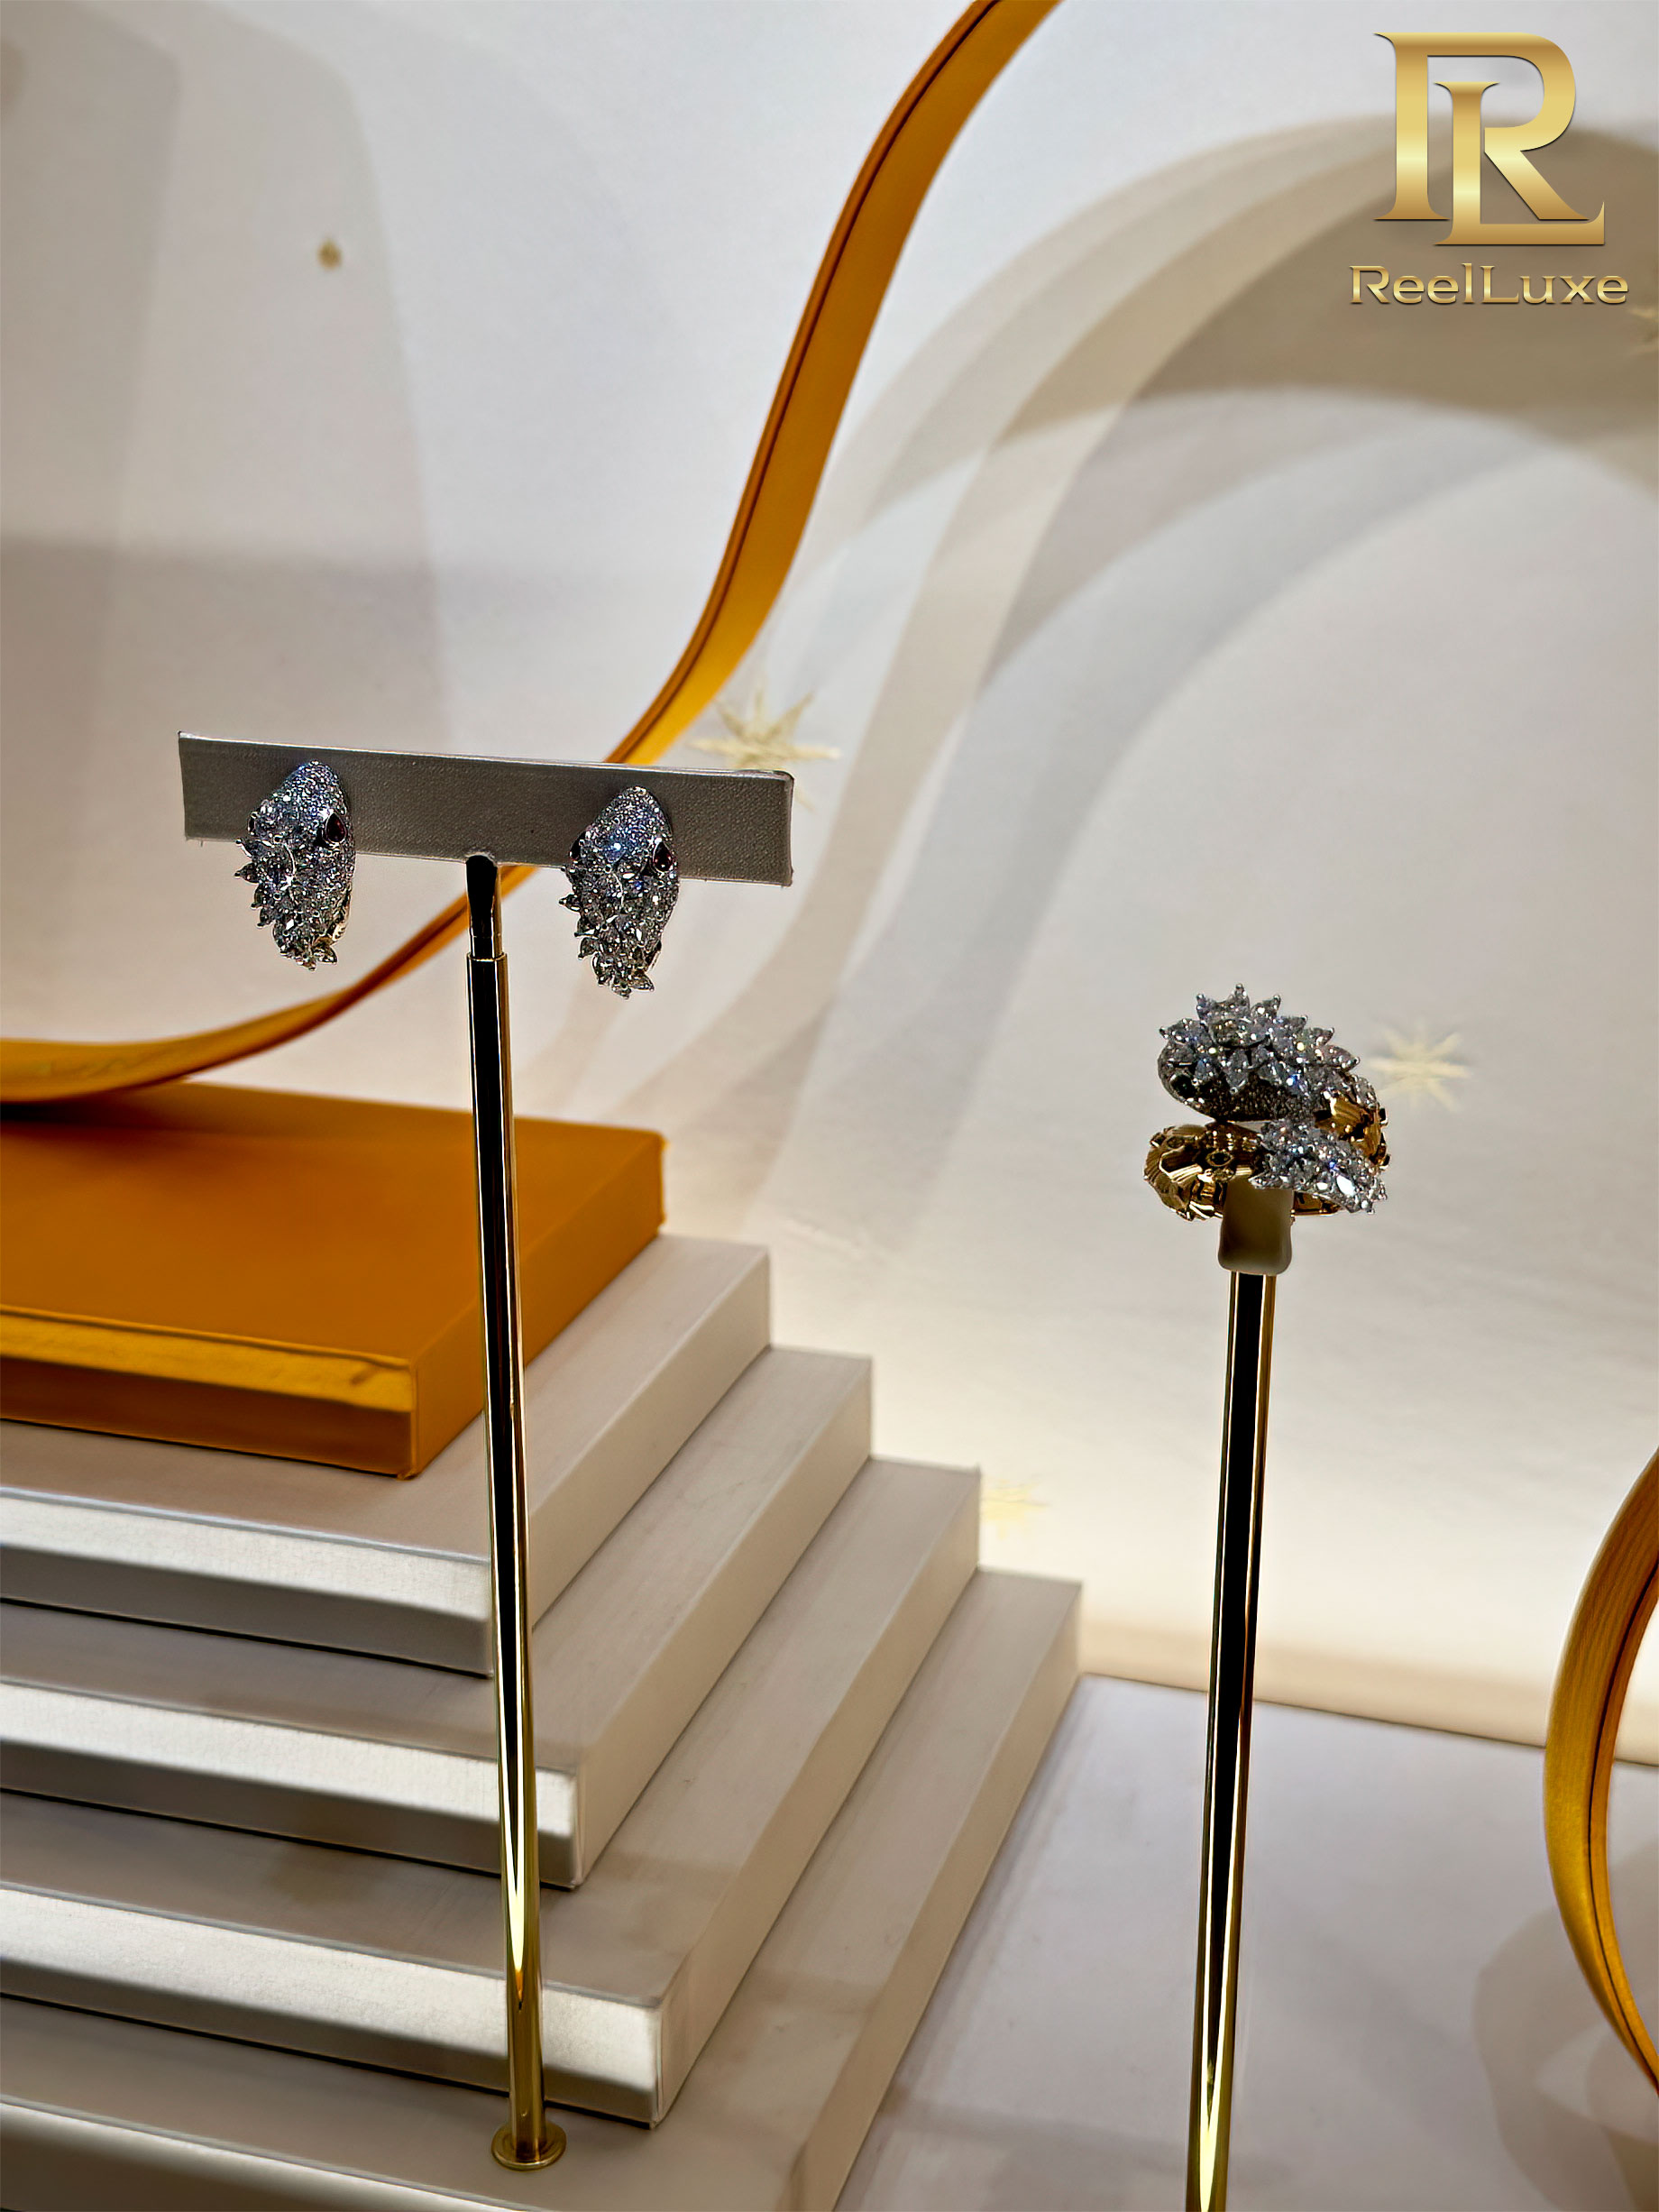 Bulgari Serpenti Earrings and Ring - Boutique Bvlgari Firenze - Florence, Italy - 2